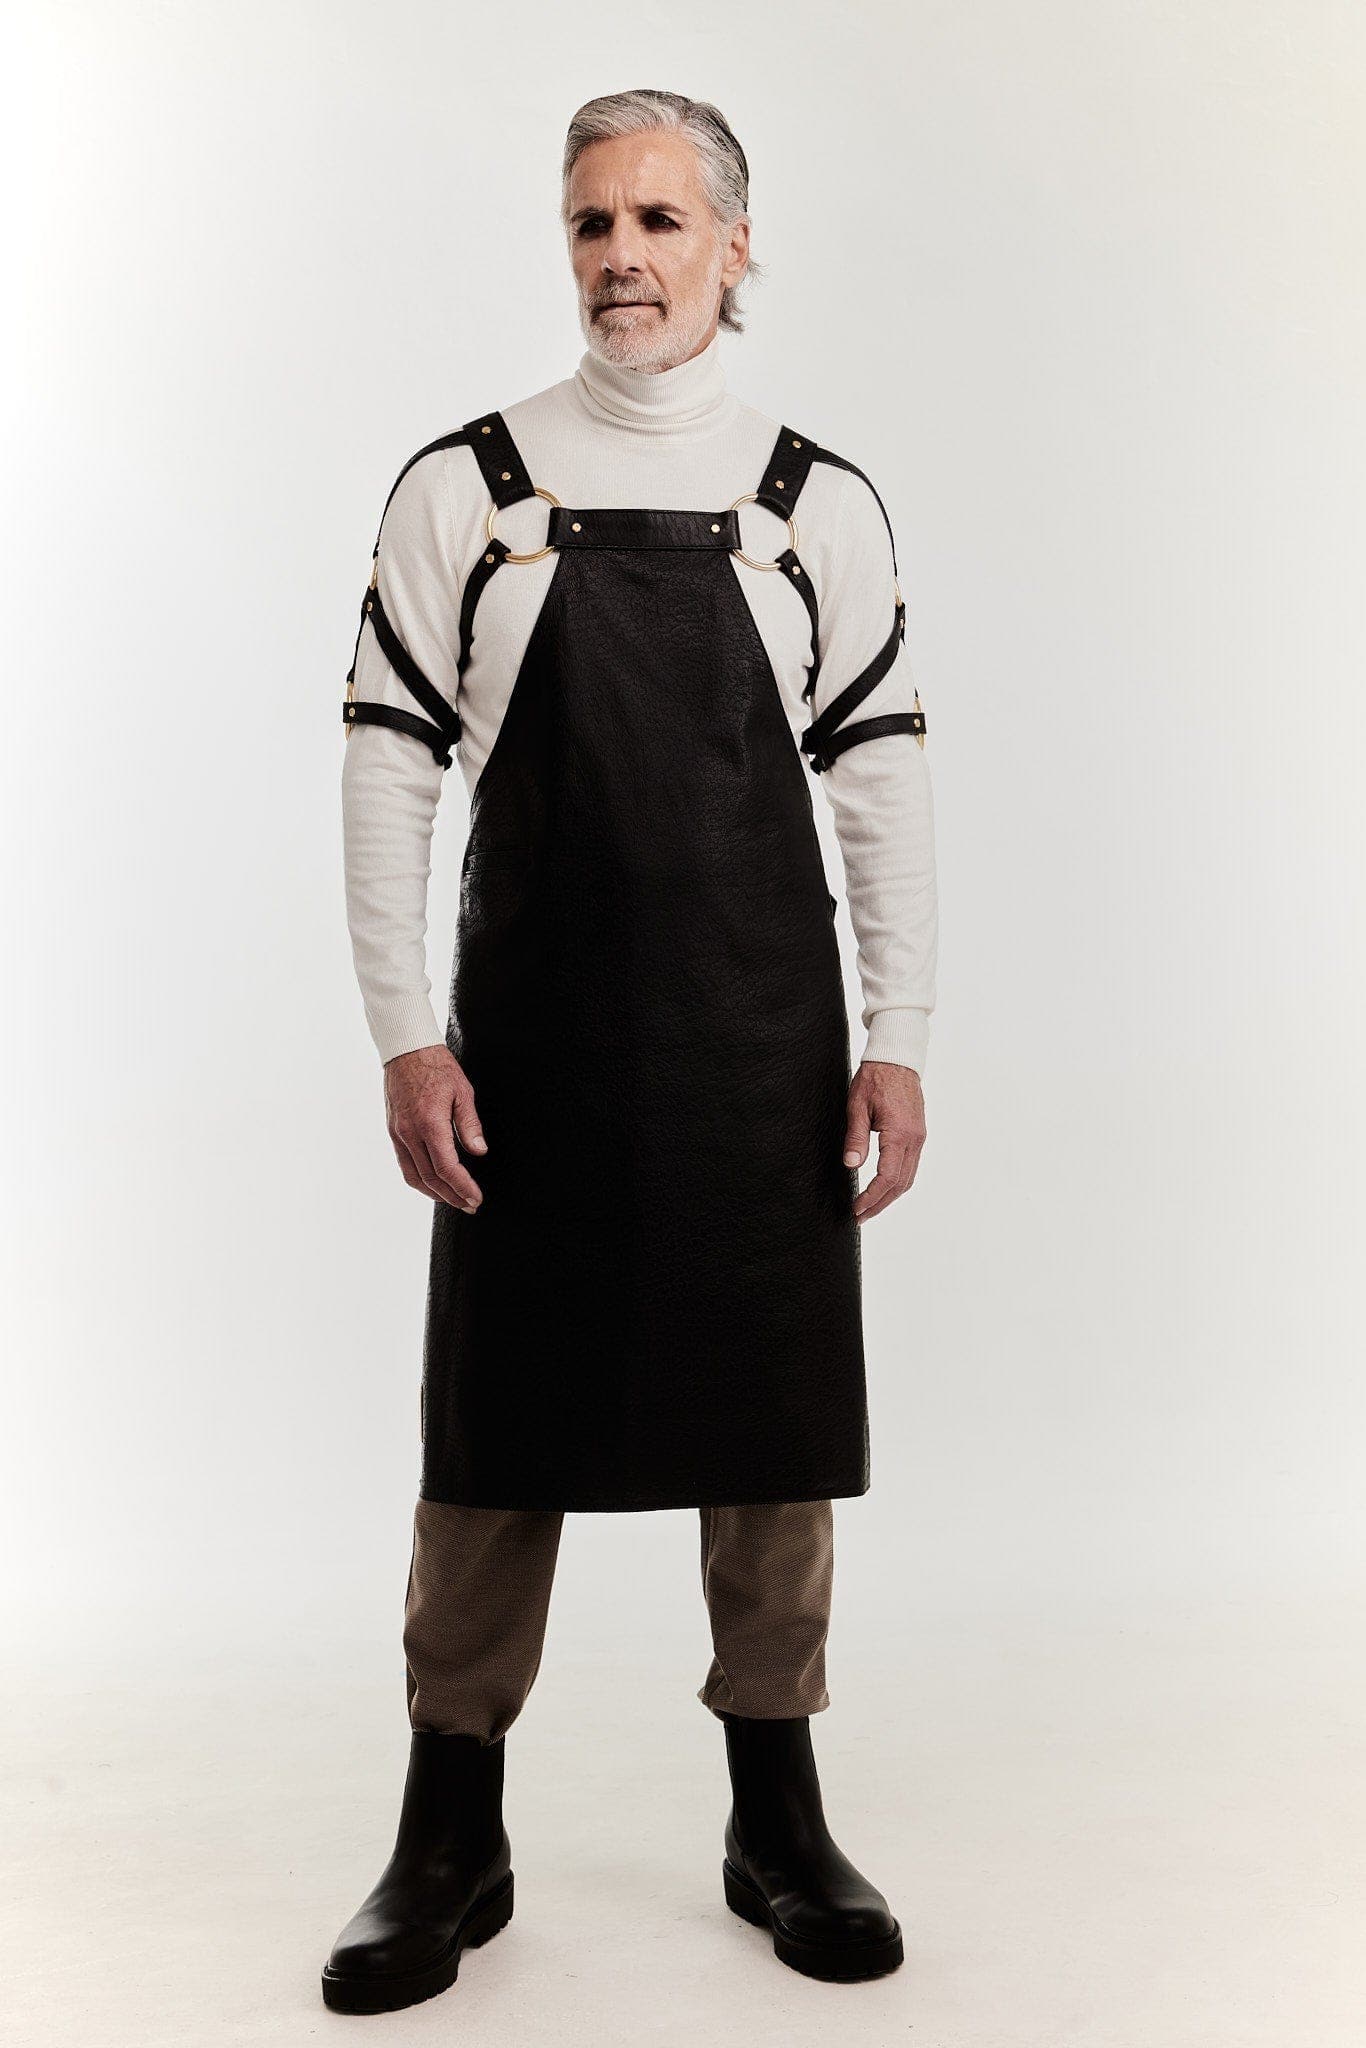 Eskandur men's black leather luxury premium apron front view grey haired man white shirt gold o-rings on the bust